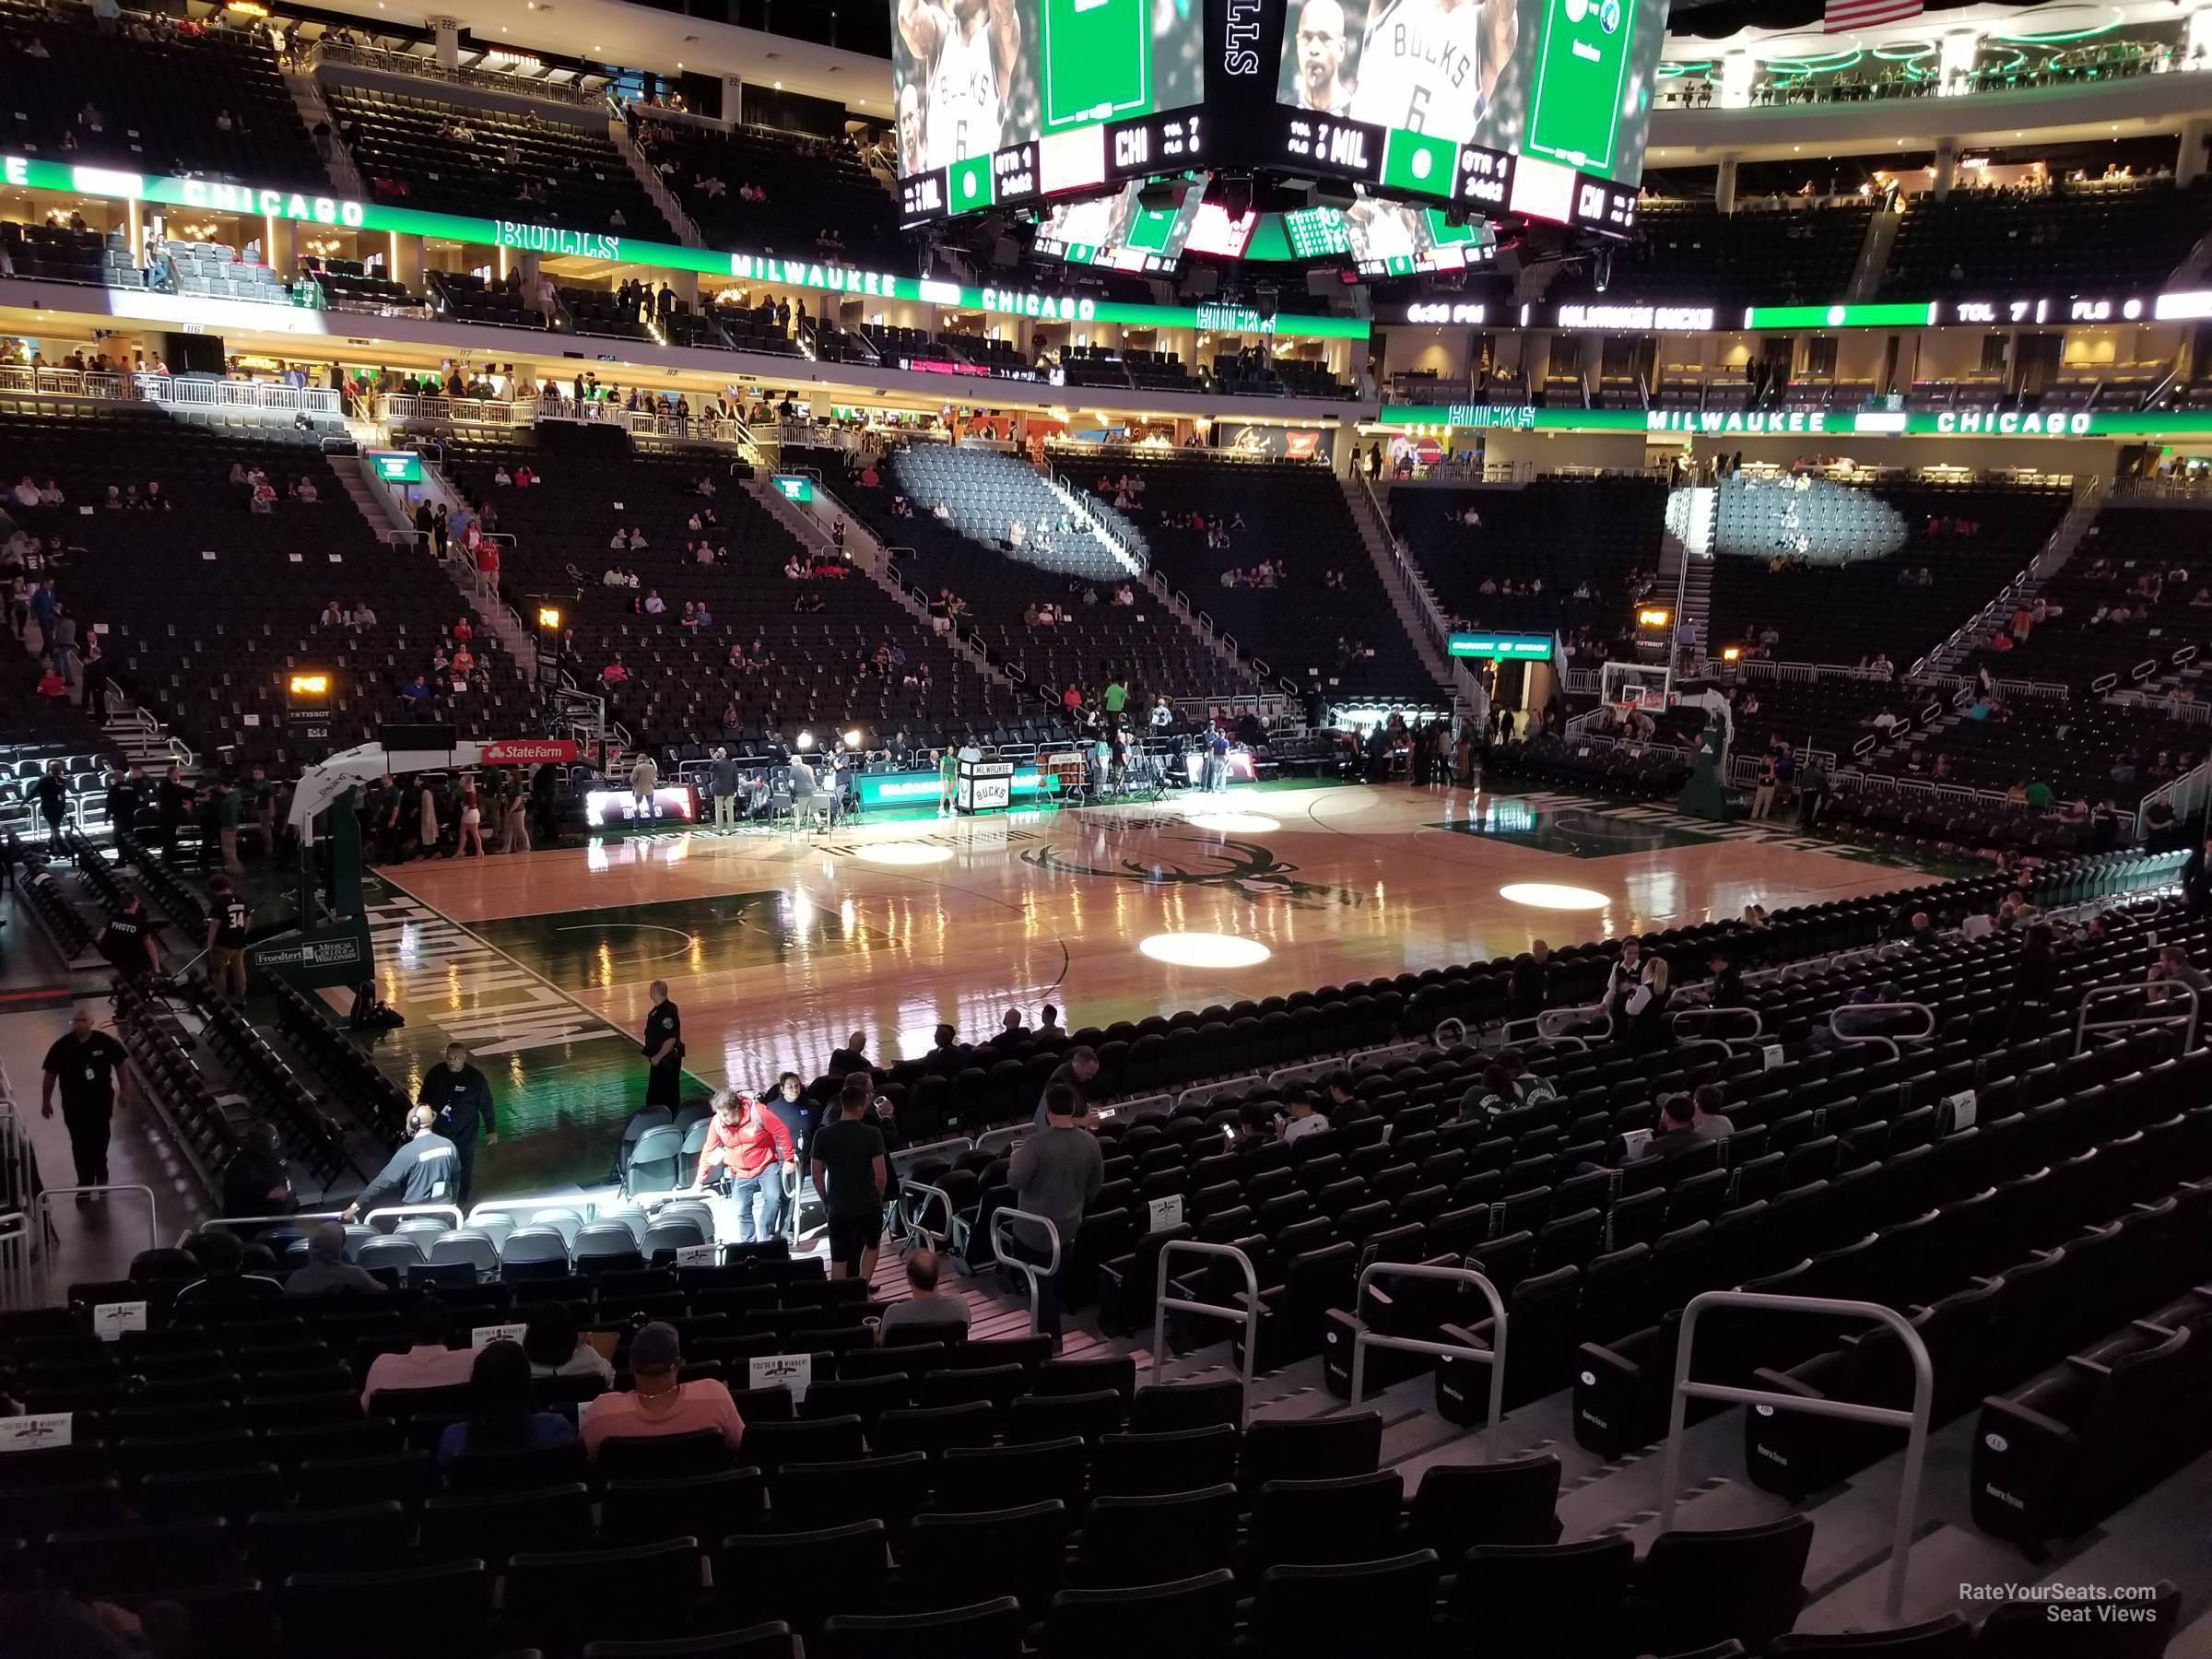 section 108, row 16 seat view  for basketball - fiserv forum